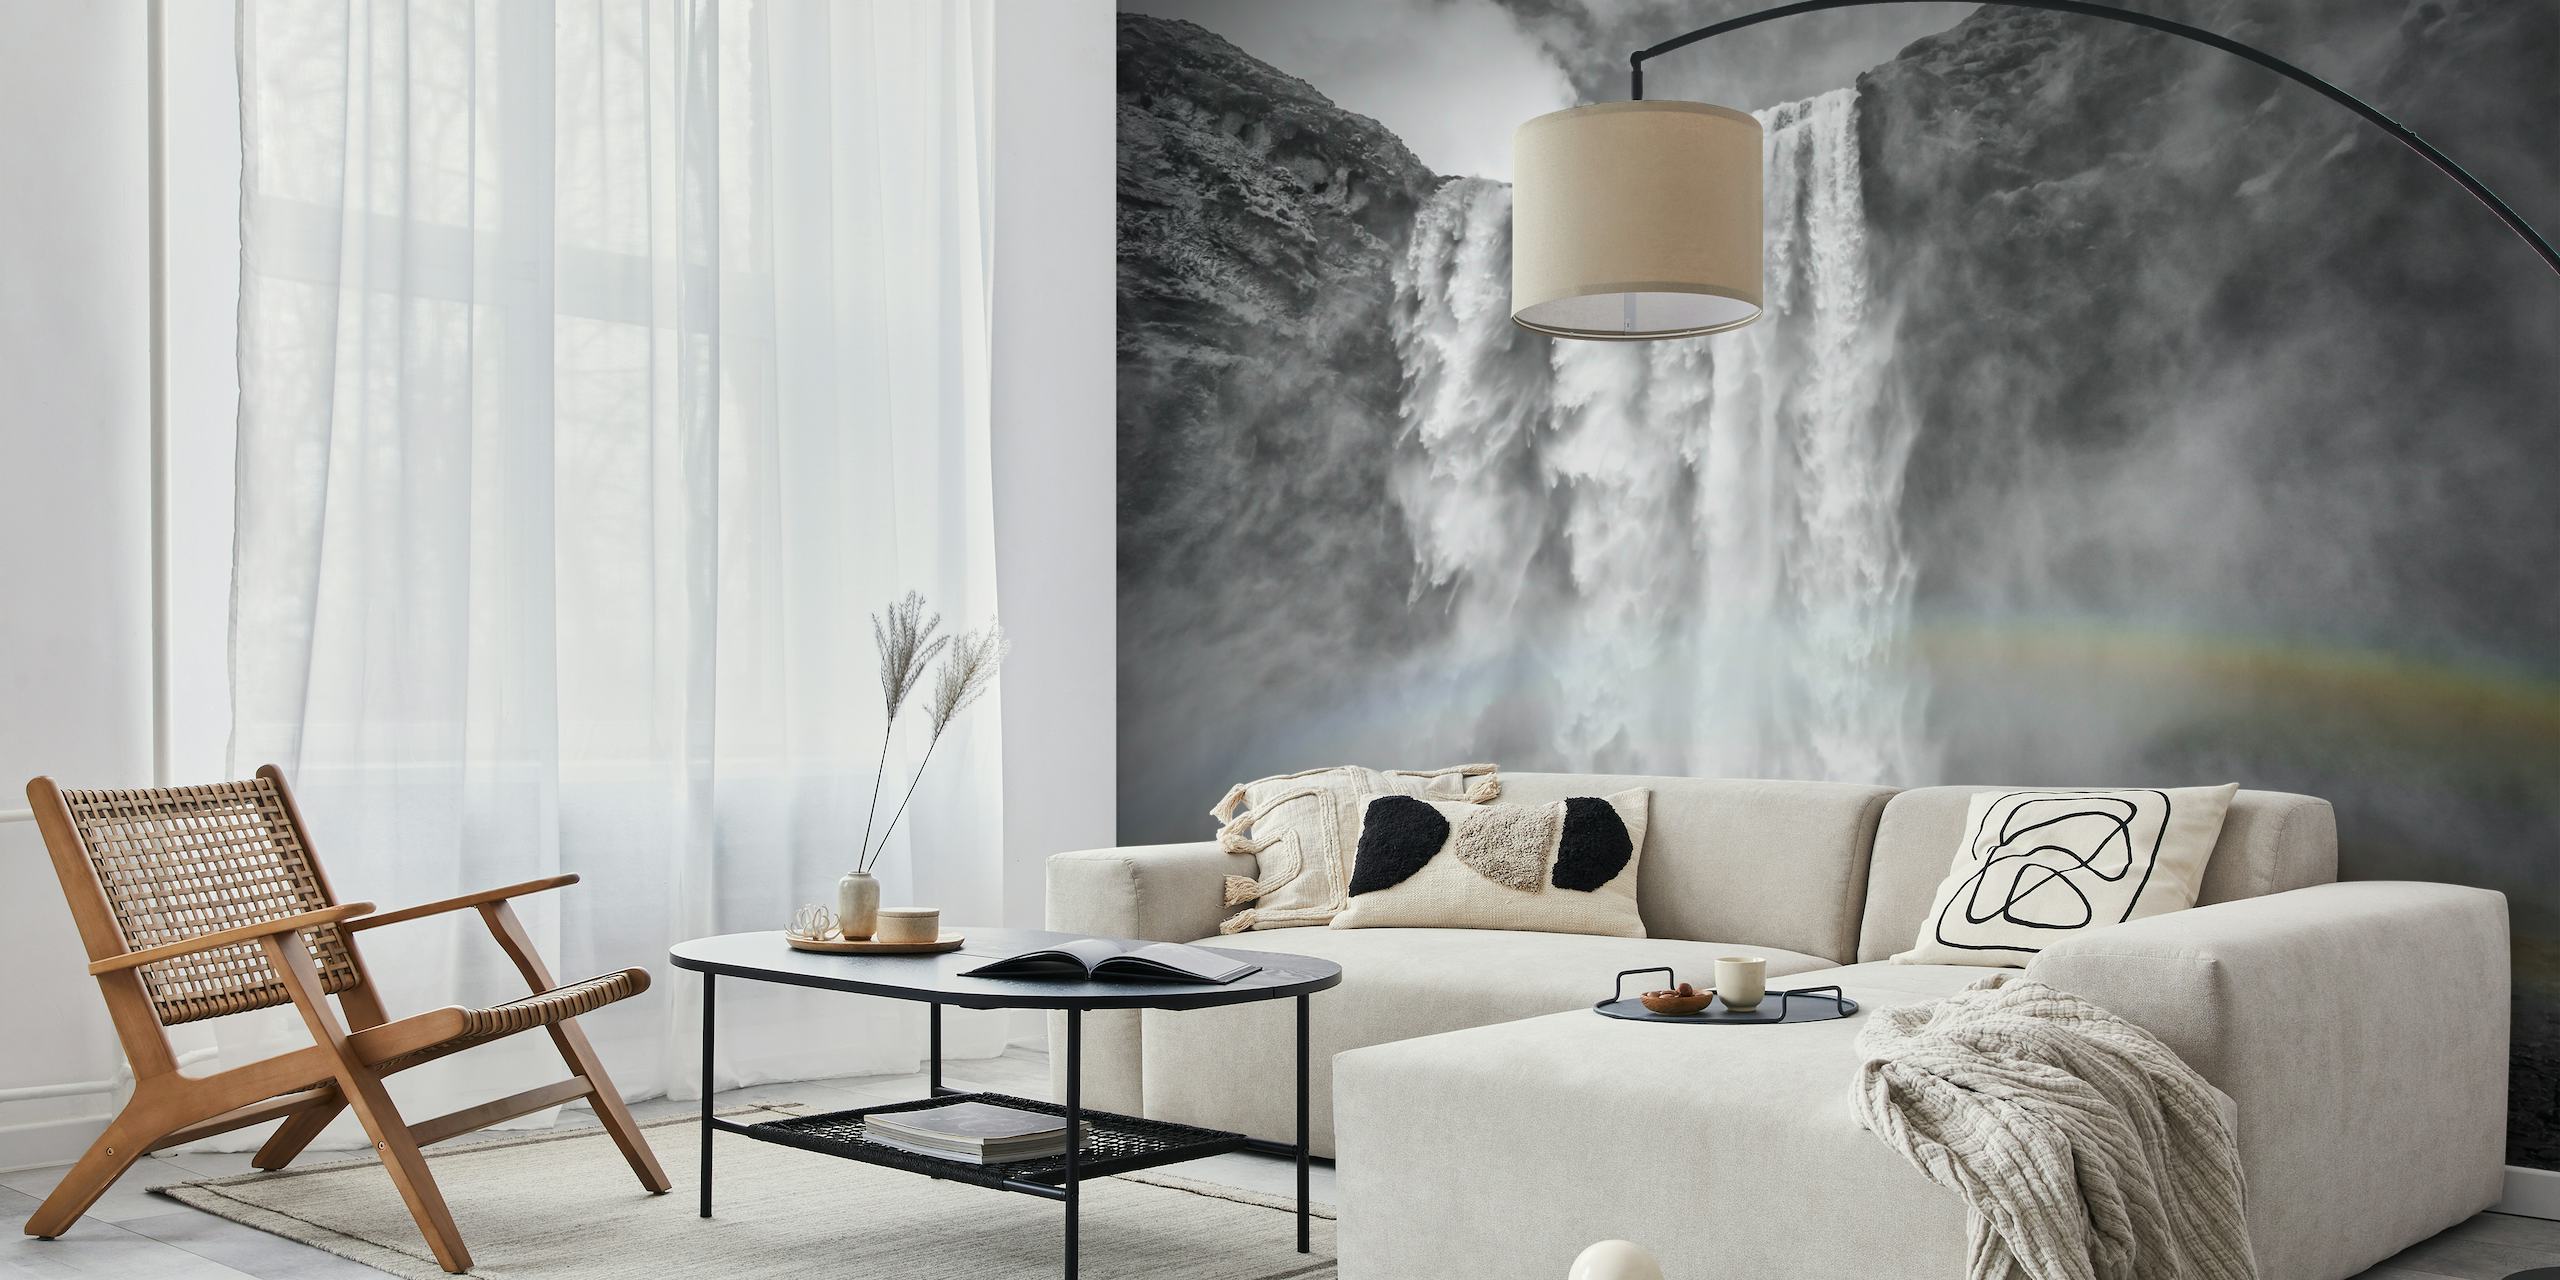 ICELAND Skogafoss wall mural featuring a majestic waterfall with a faint rainbow